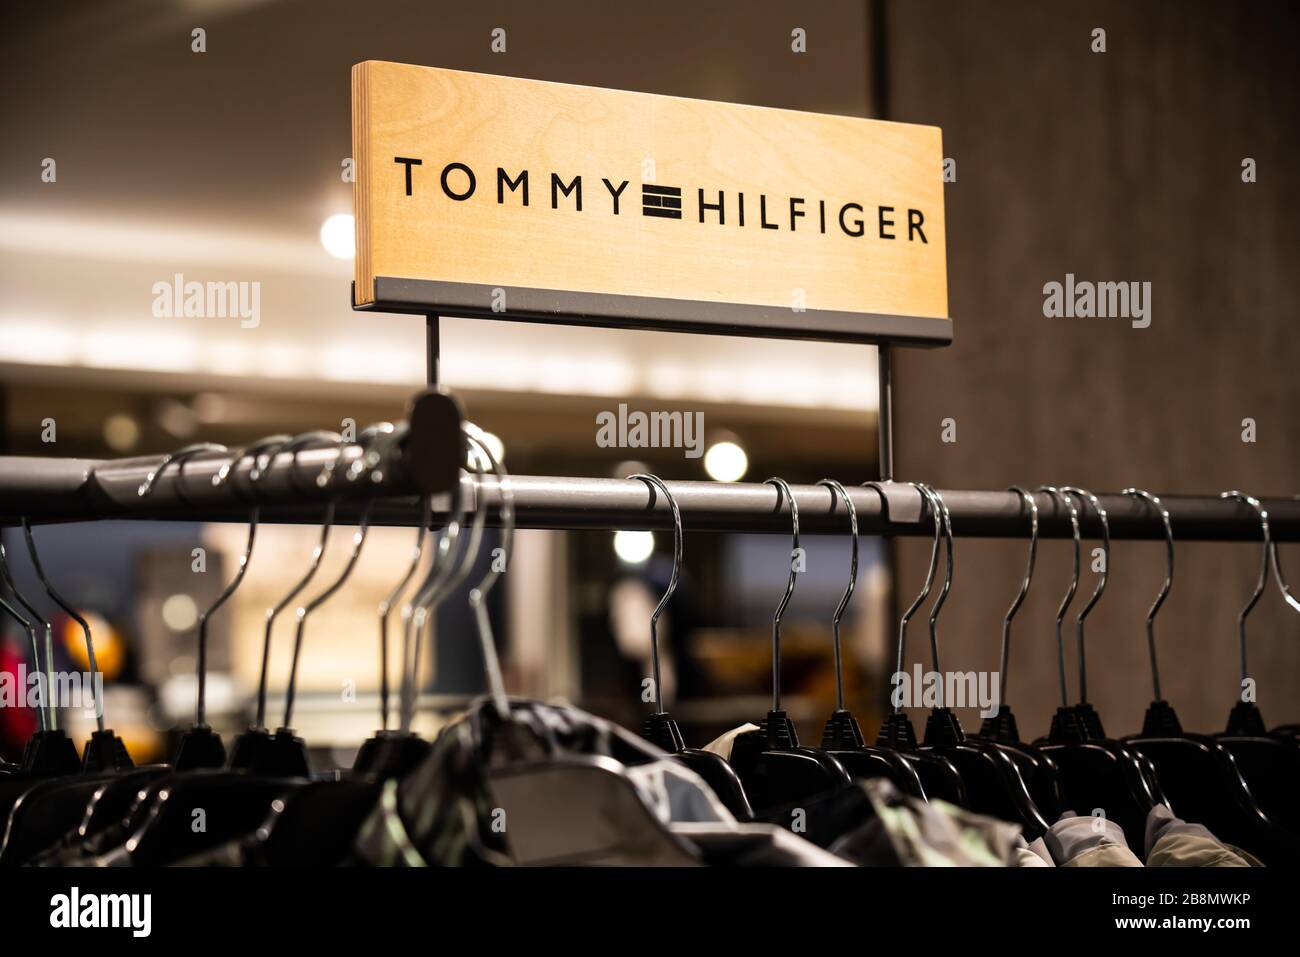 American premium clothing company, Tommy Hilfiger stall seen in a Macy's department store in New York City Stock Photo Alamy